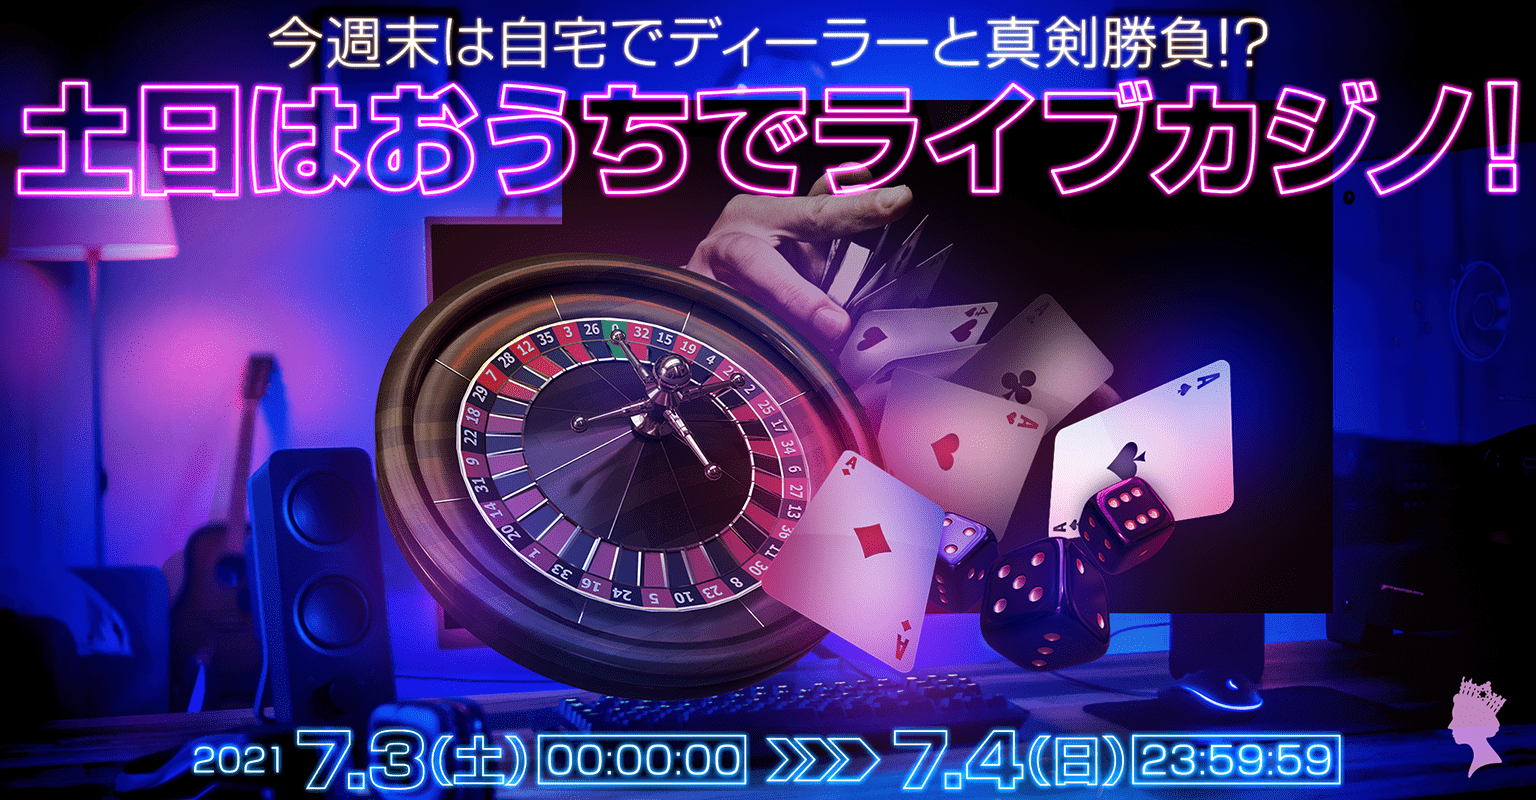 Live Casino at Home on Weekends this July 3-4. Play classic table games like Baccarat, Roulette, Poker, Blackjack, and many more. 